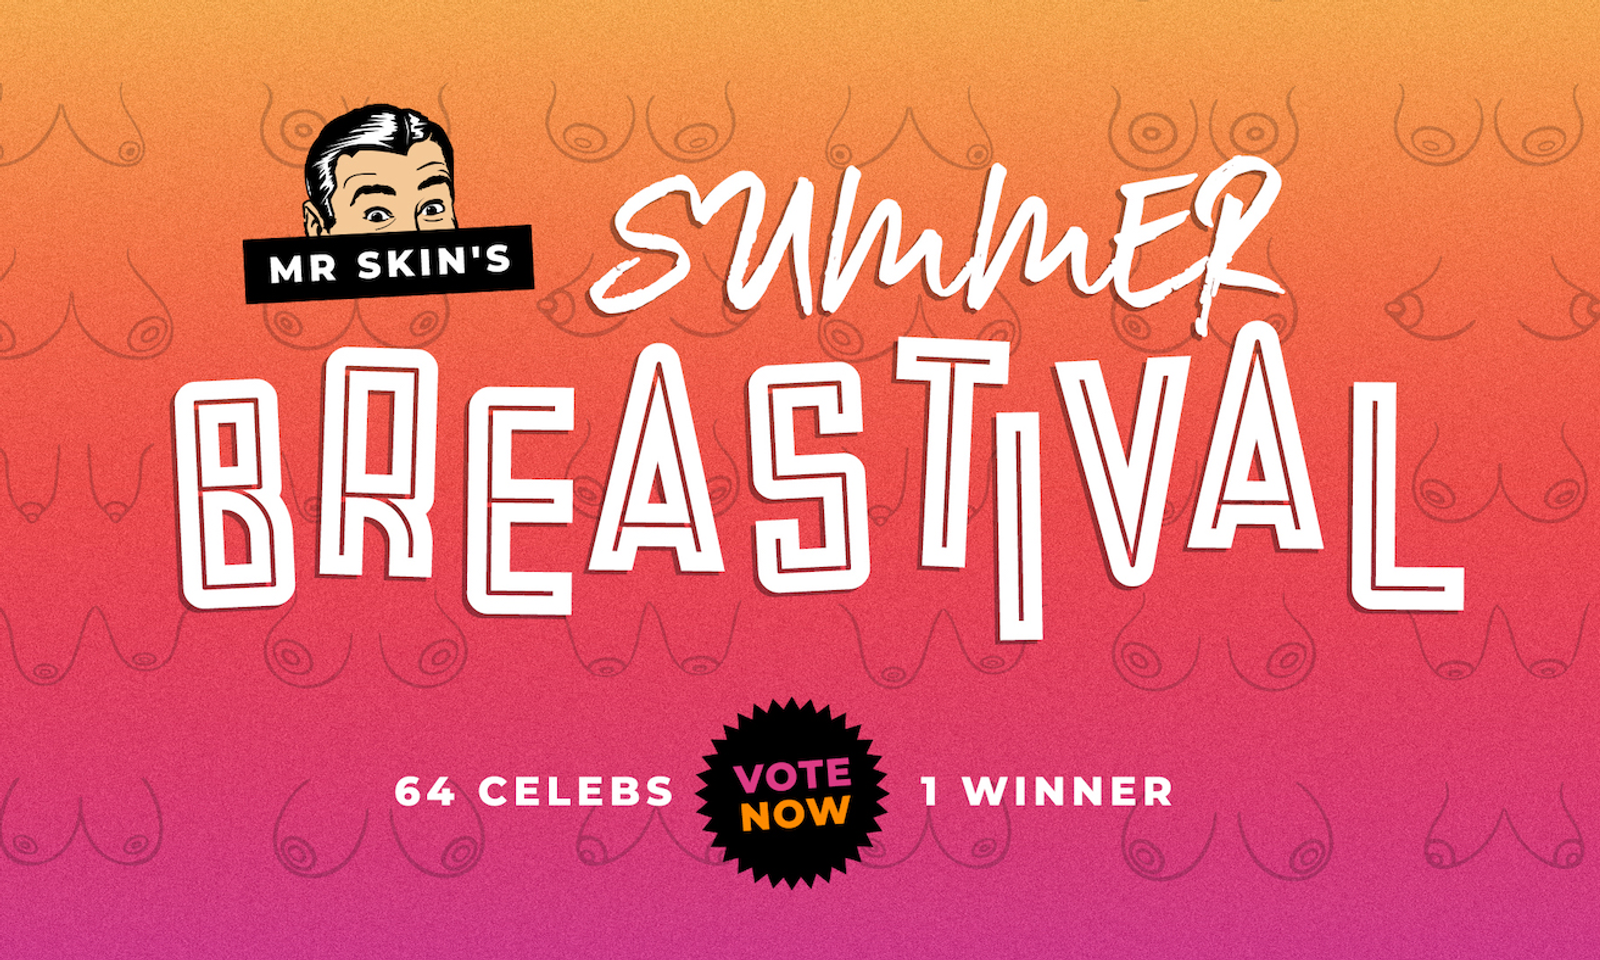 Mr. Skin Launches 'Summer Breastival' Bracket Contest